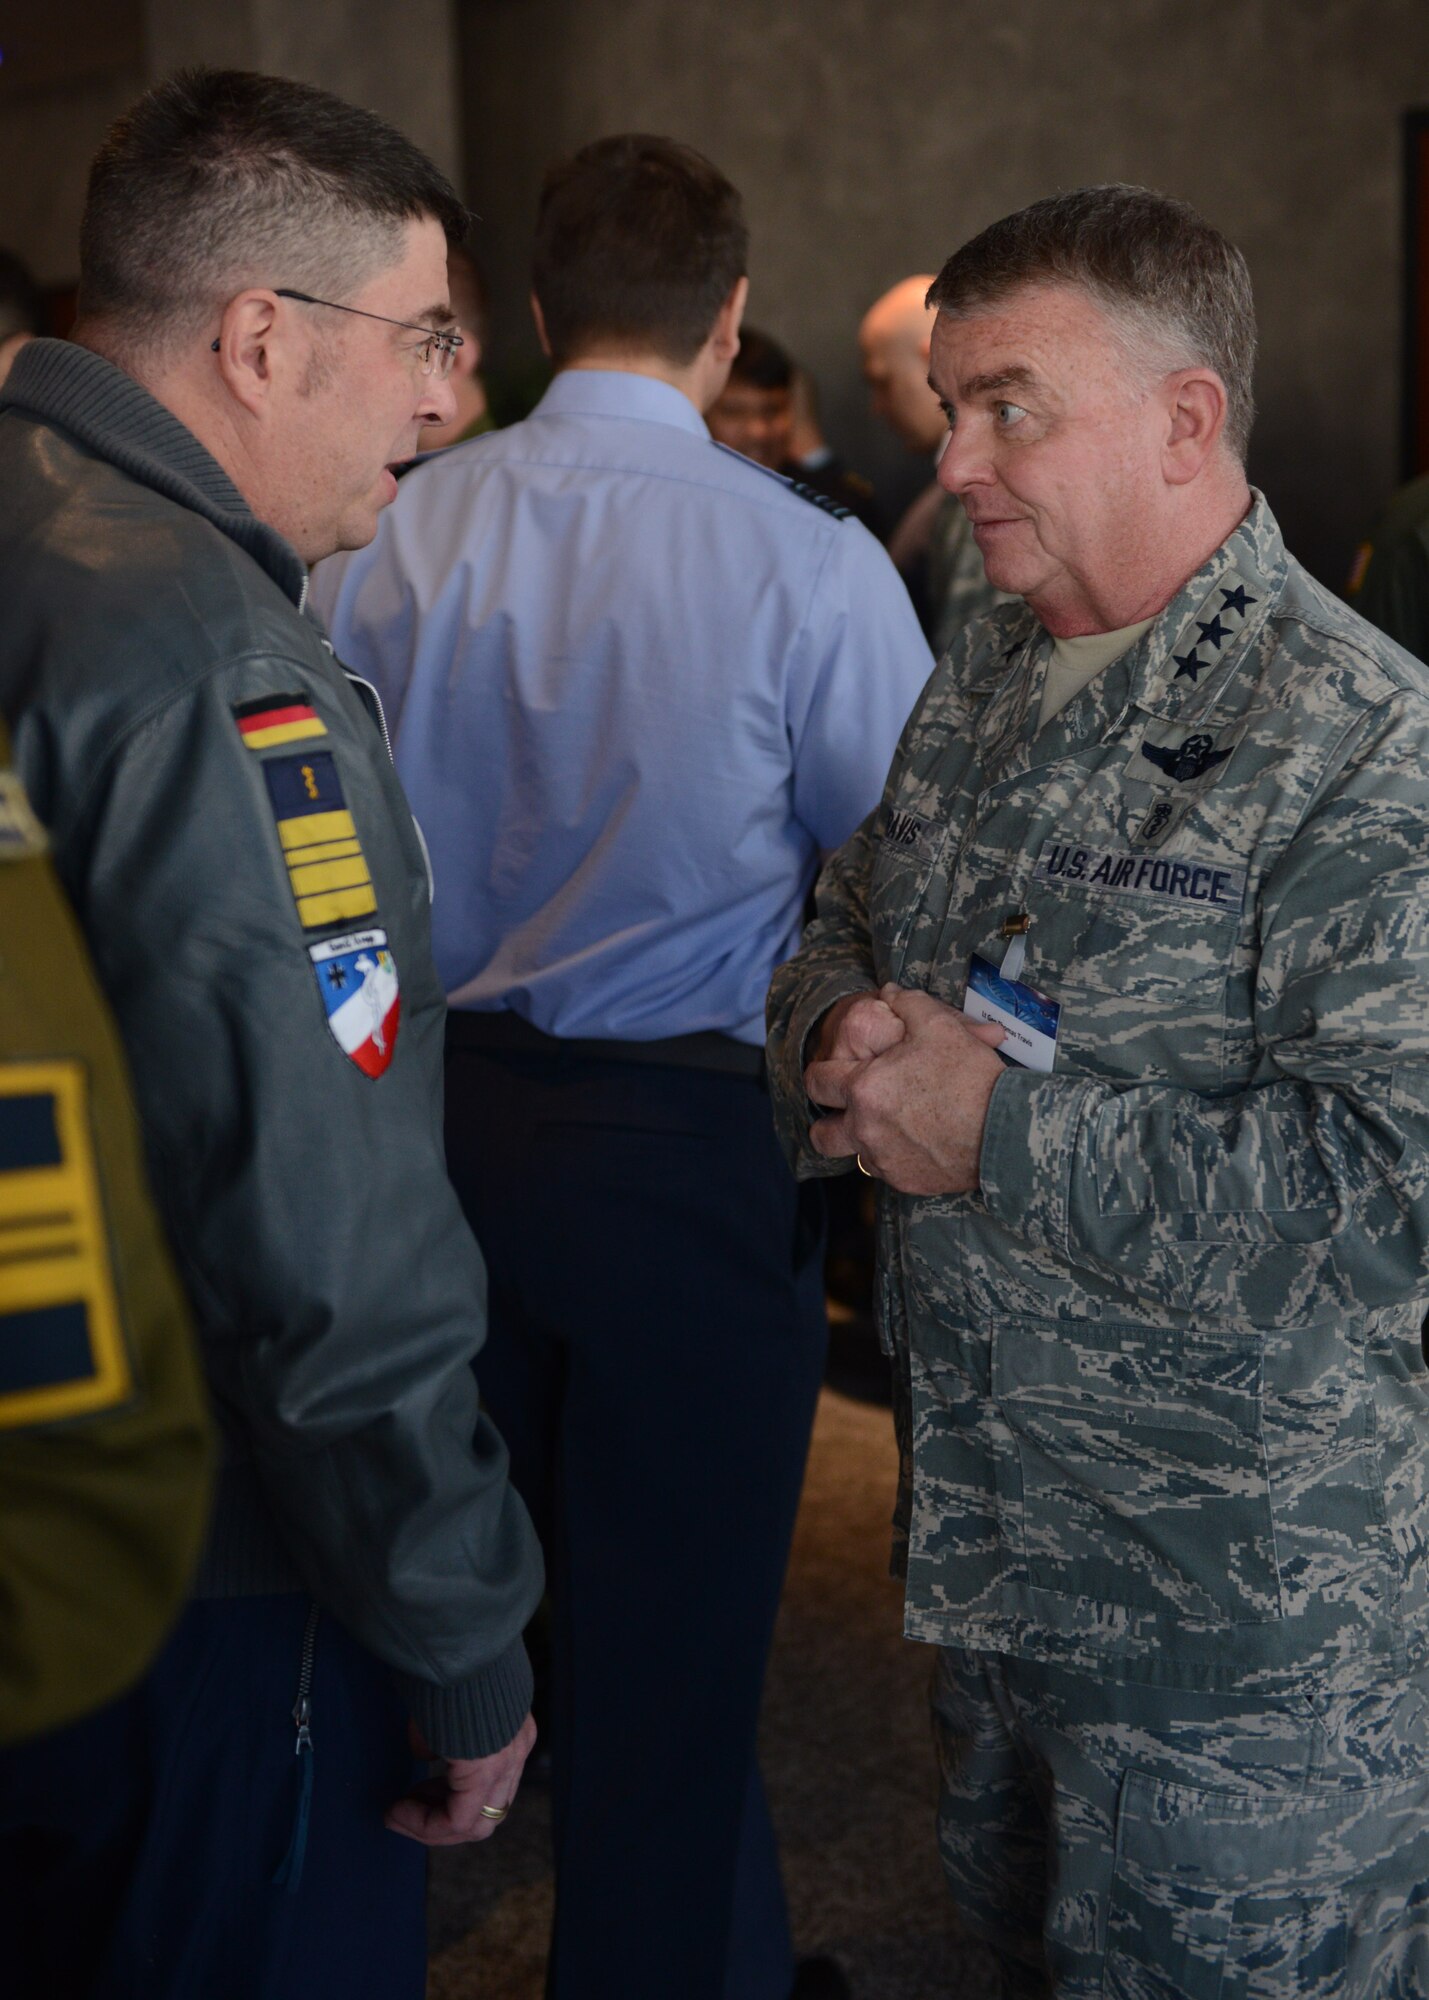 RAMSTEIN AIR BASE, Germany -- Dr. Joachim Koch (Left), flight surgeon commander with the German navy, chats with Lt. Gen. Thomas W. Travis (Right), U.S. Air Force surgeon general, during a break at the 29th Annual Aerospace Medicine Summit and NATO Science and Technology Organization Technical Course at the Hercules Theater here March 10, 2014. The summit is a joint effort between the USAFE-AFAFRICA Surgeon General’s office and NATO to share information in the aerospace medical world and build relationships with international partners.  (U.S. Air Force Photo by Tech. Sgt. James M. Hodgman)